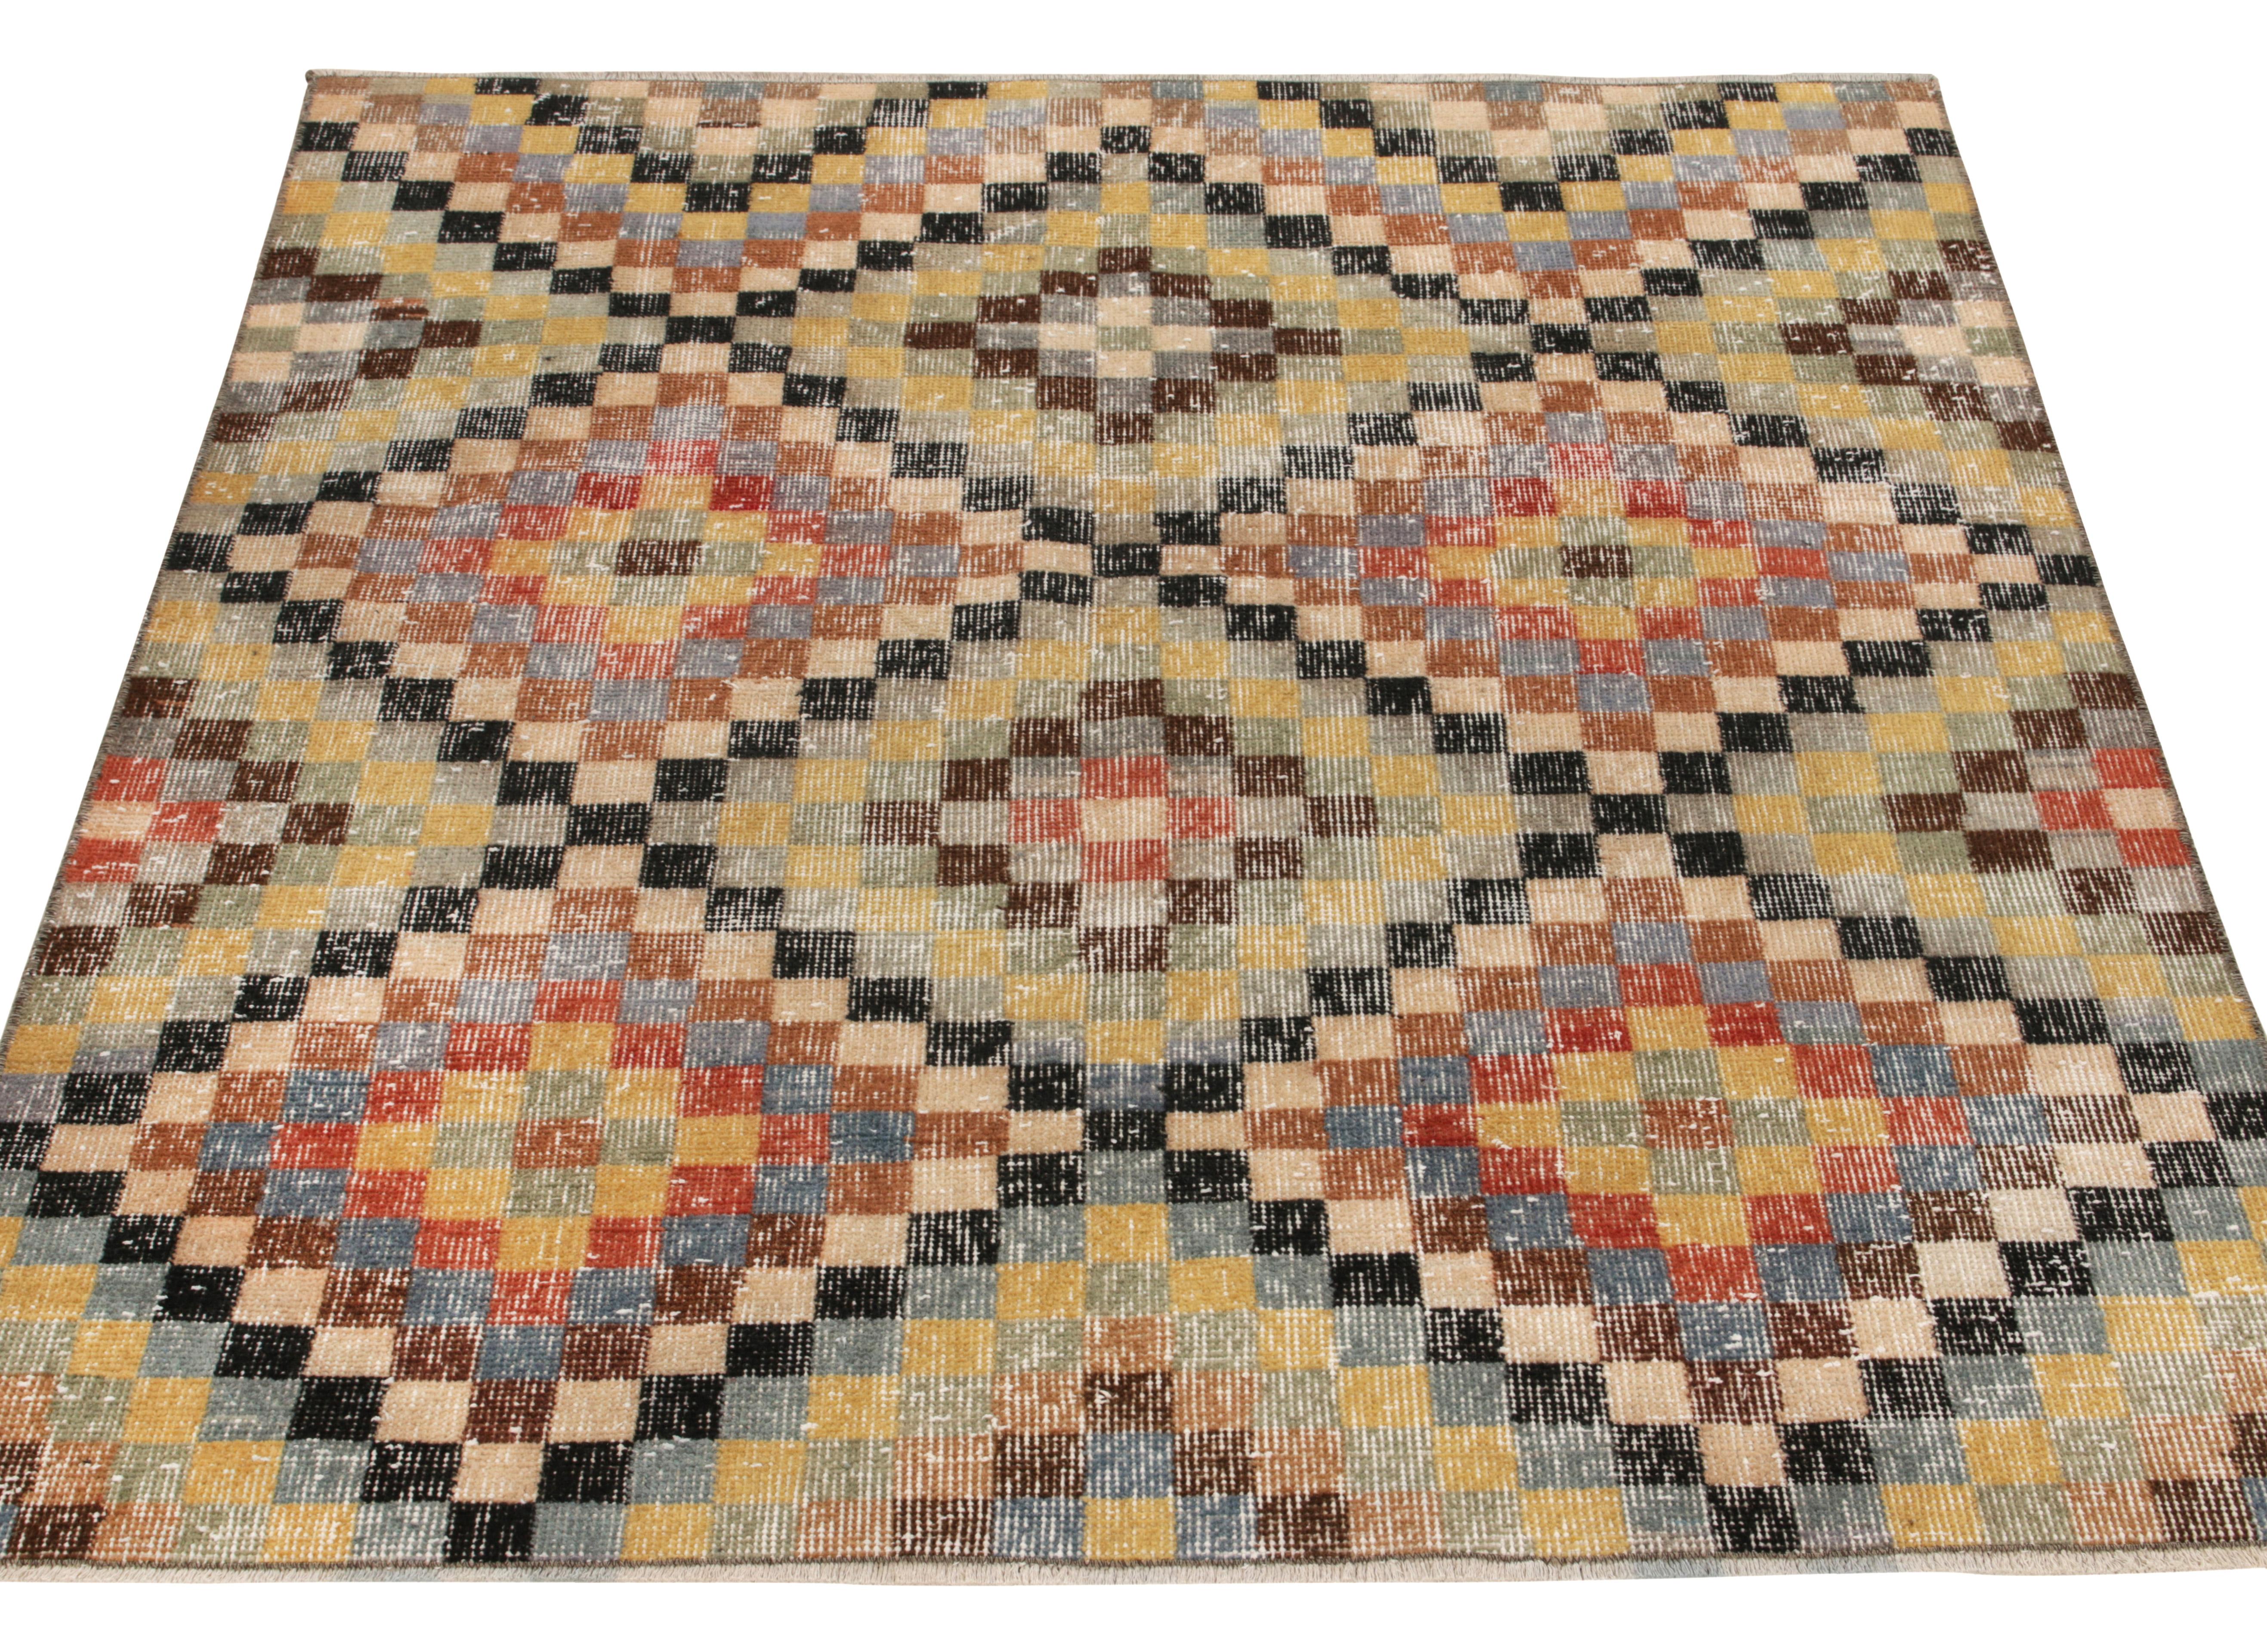 A distressed square rug from a reputed multidisciplinary Turkish designer highlighting their love for wide-ranging mid-century rug aesthetics, now joining our Mid century Pasha collection. Hand-knotted in low-pile wool circa 1960-1970, relishing in